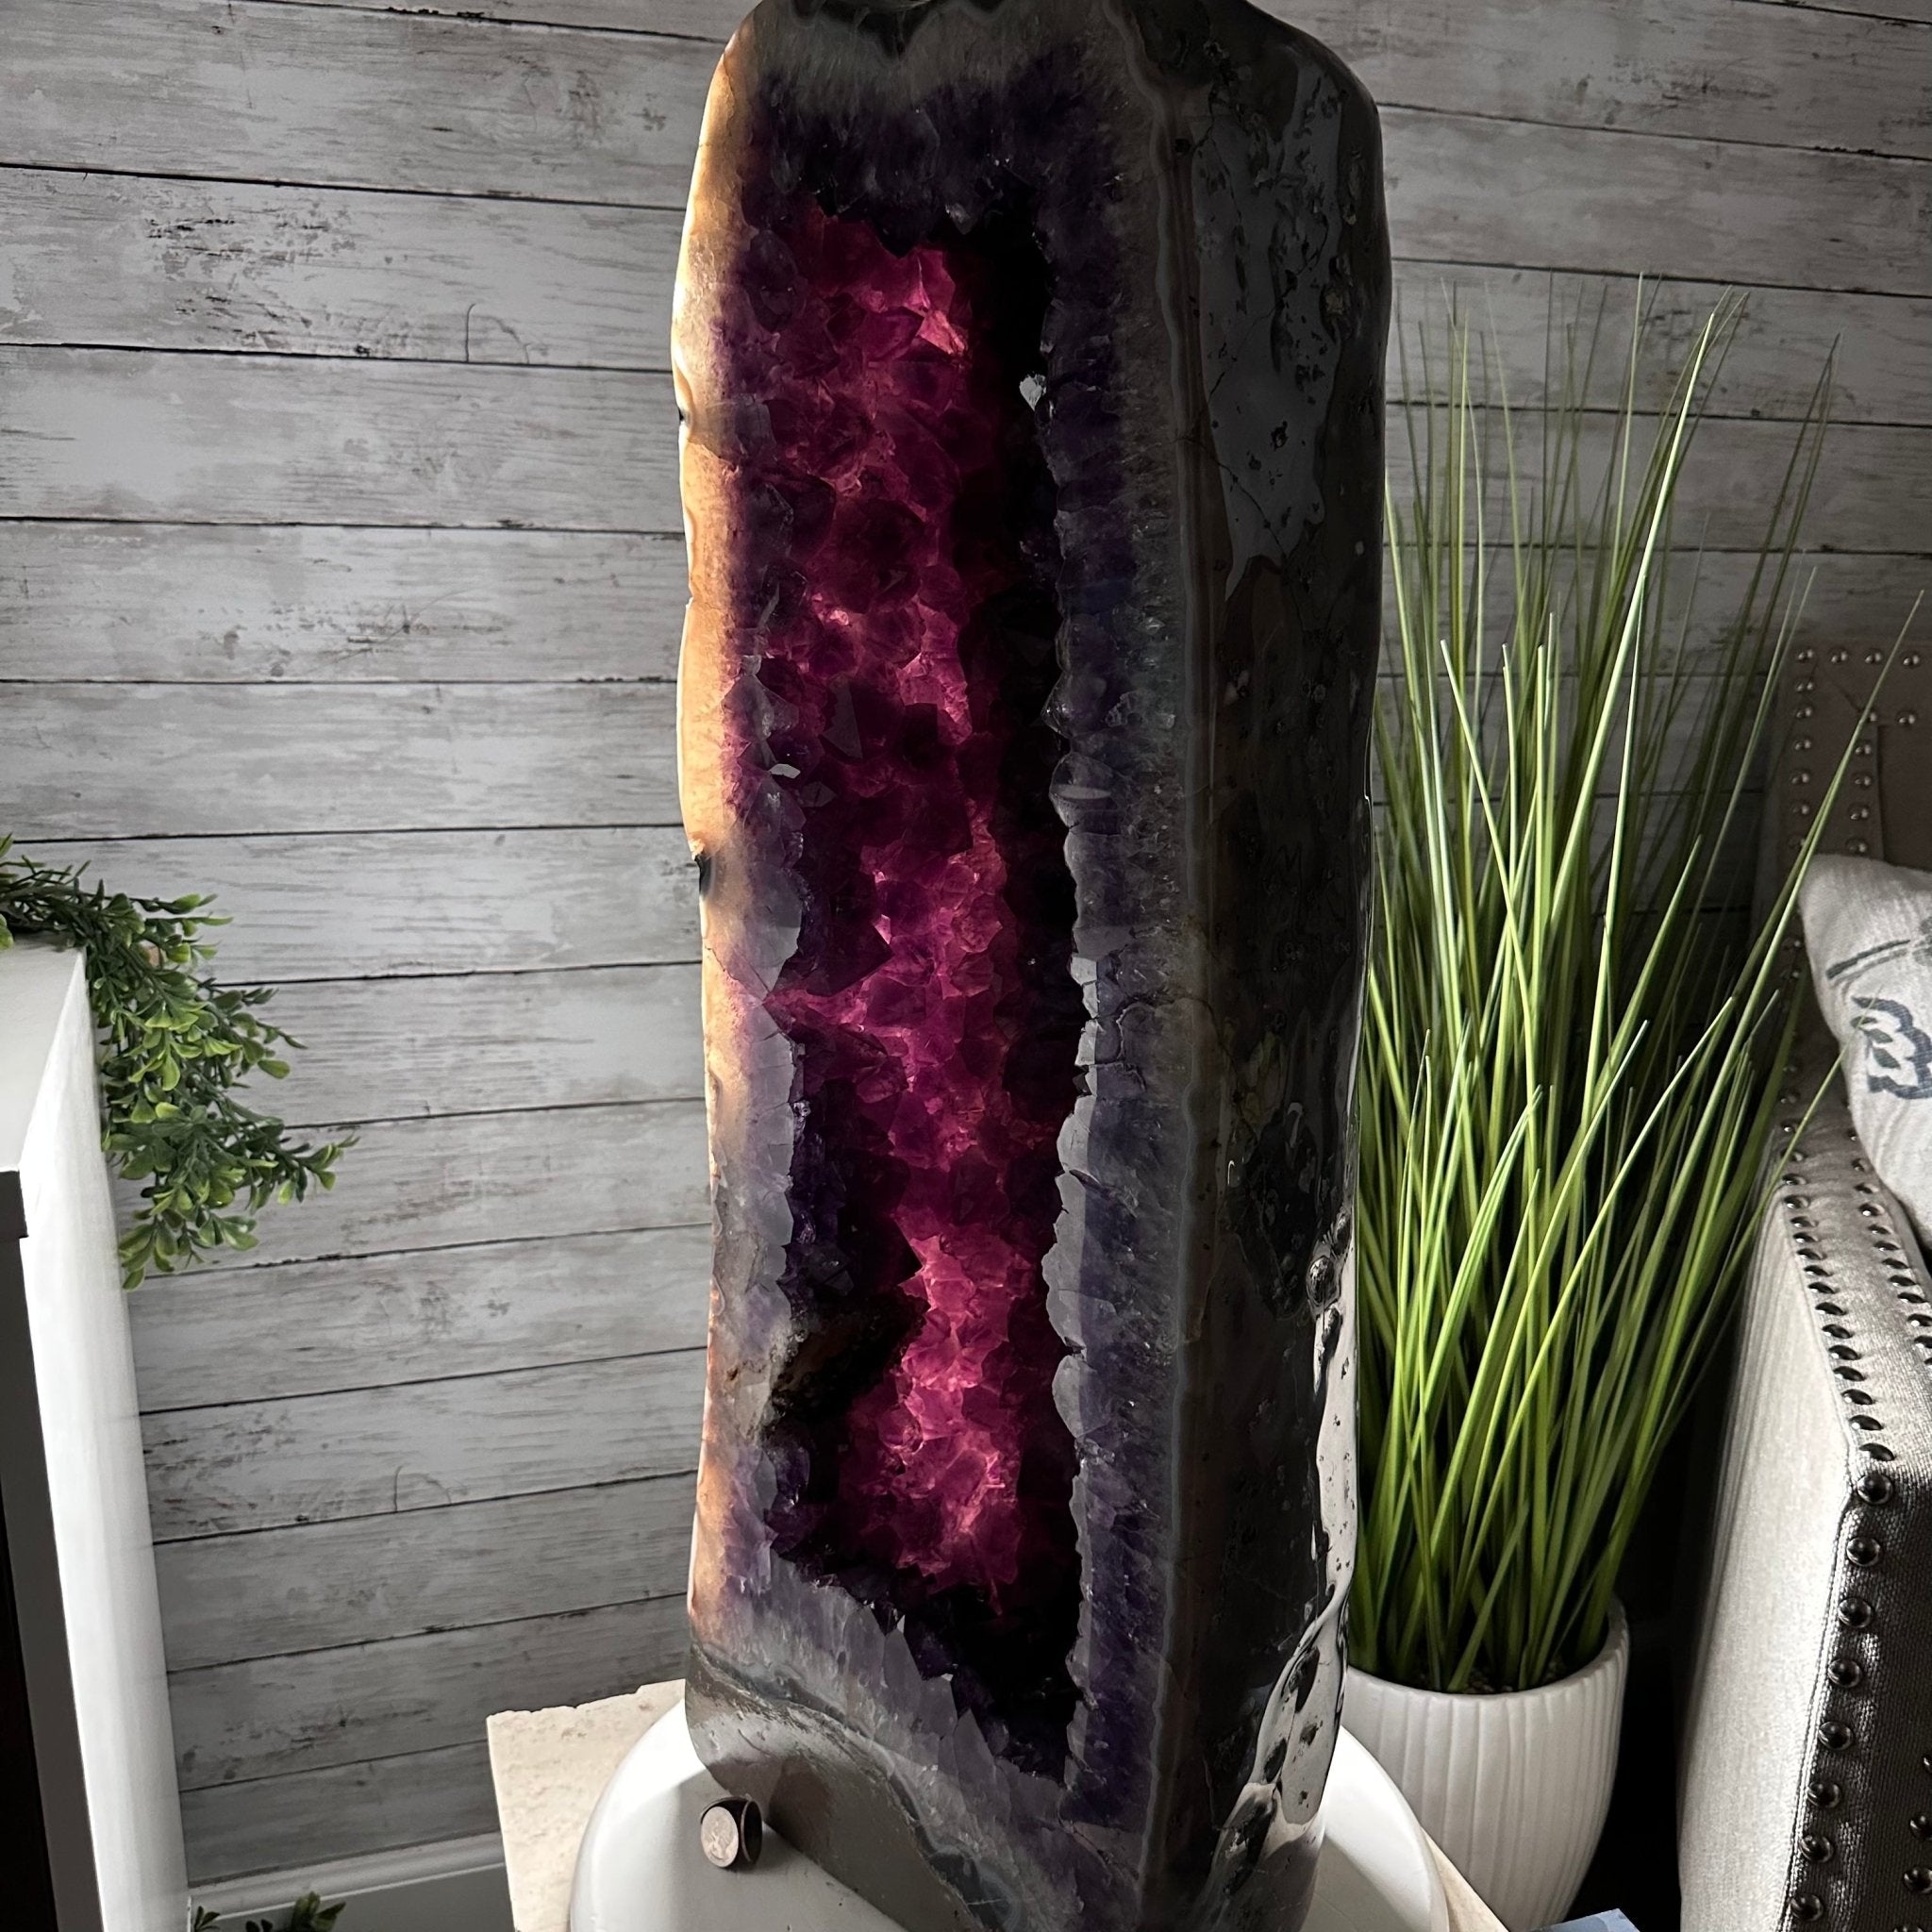 Extra Plus Quality Polished Brazilian Amethyst Cathedral, 122.7 lbs & 29.25" tall Model #5602-0124 by Brazil Gems - Brazil GemsBrazil GemsExtra Plus Quality Polished Brazilian Amethyst Cathedral, 122.7 lbs & 29.25" tall Model #5602-0124 by Brazil GemsPolished Cathedrals5602-0124